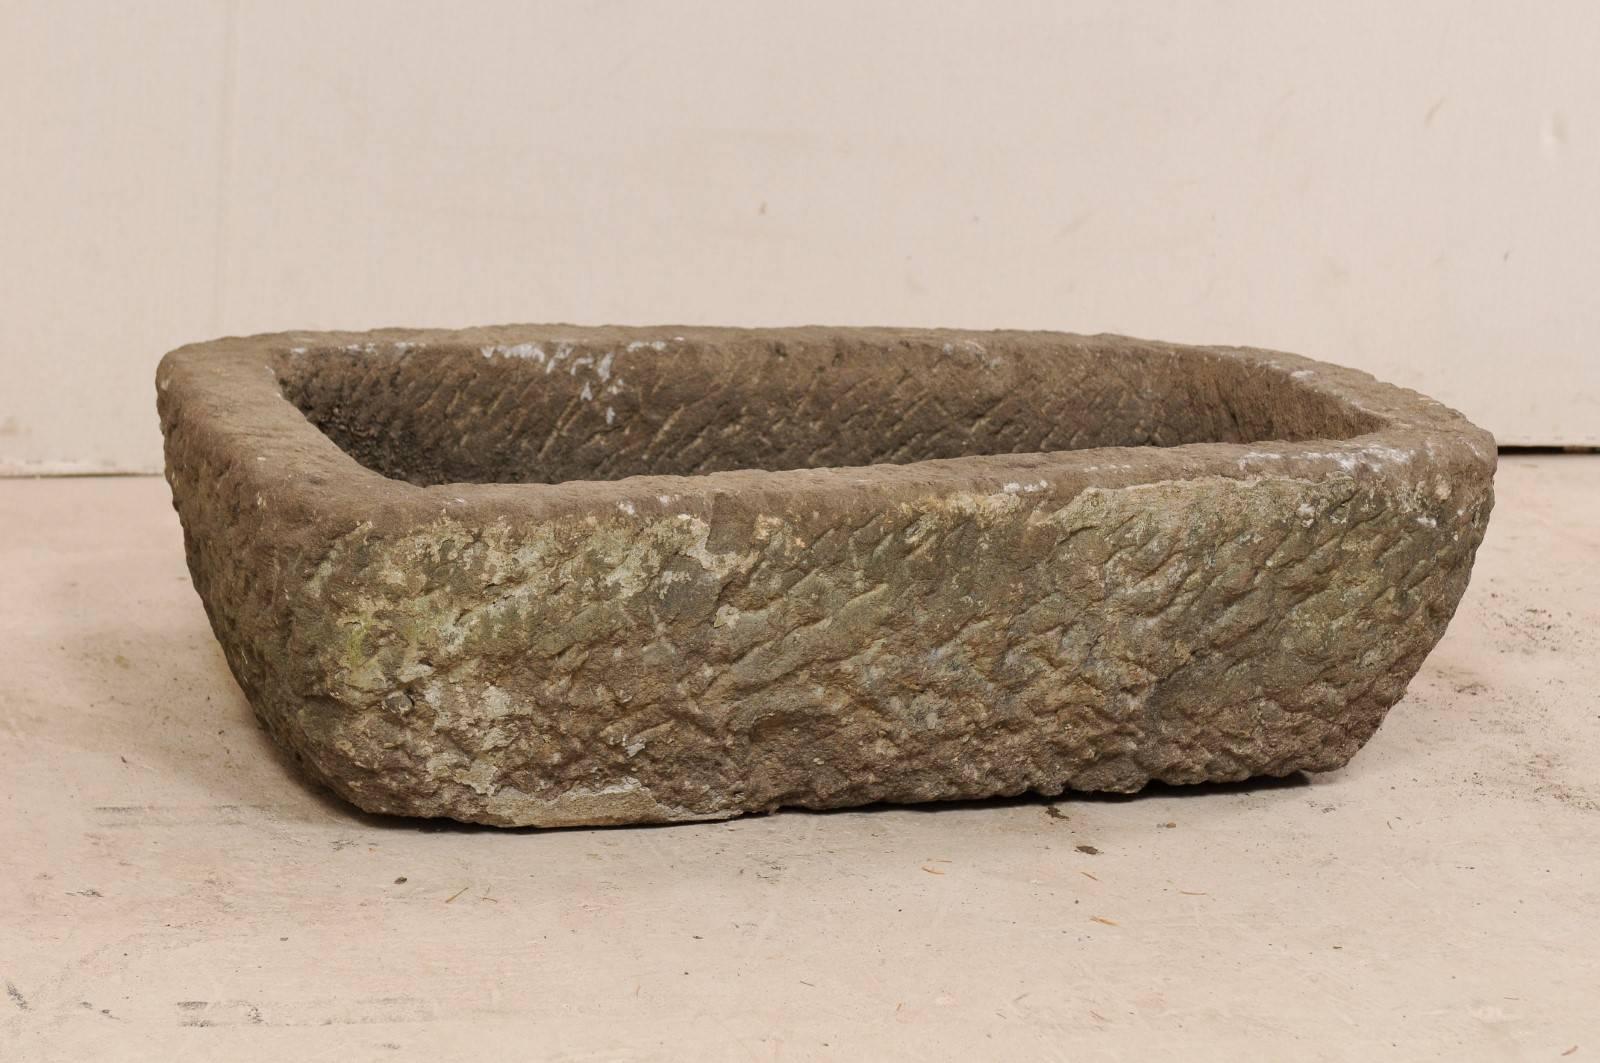 A stone trough from the turn of the 19th and 20th century. This antique stone trough from Indonesia is rectangular in shape and has been carved out of a single piece of stone. It is both beautiful and rustic, simplistic in design. A delightful